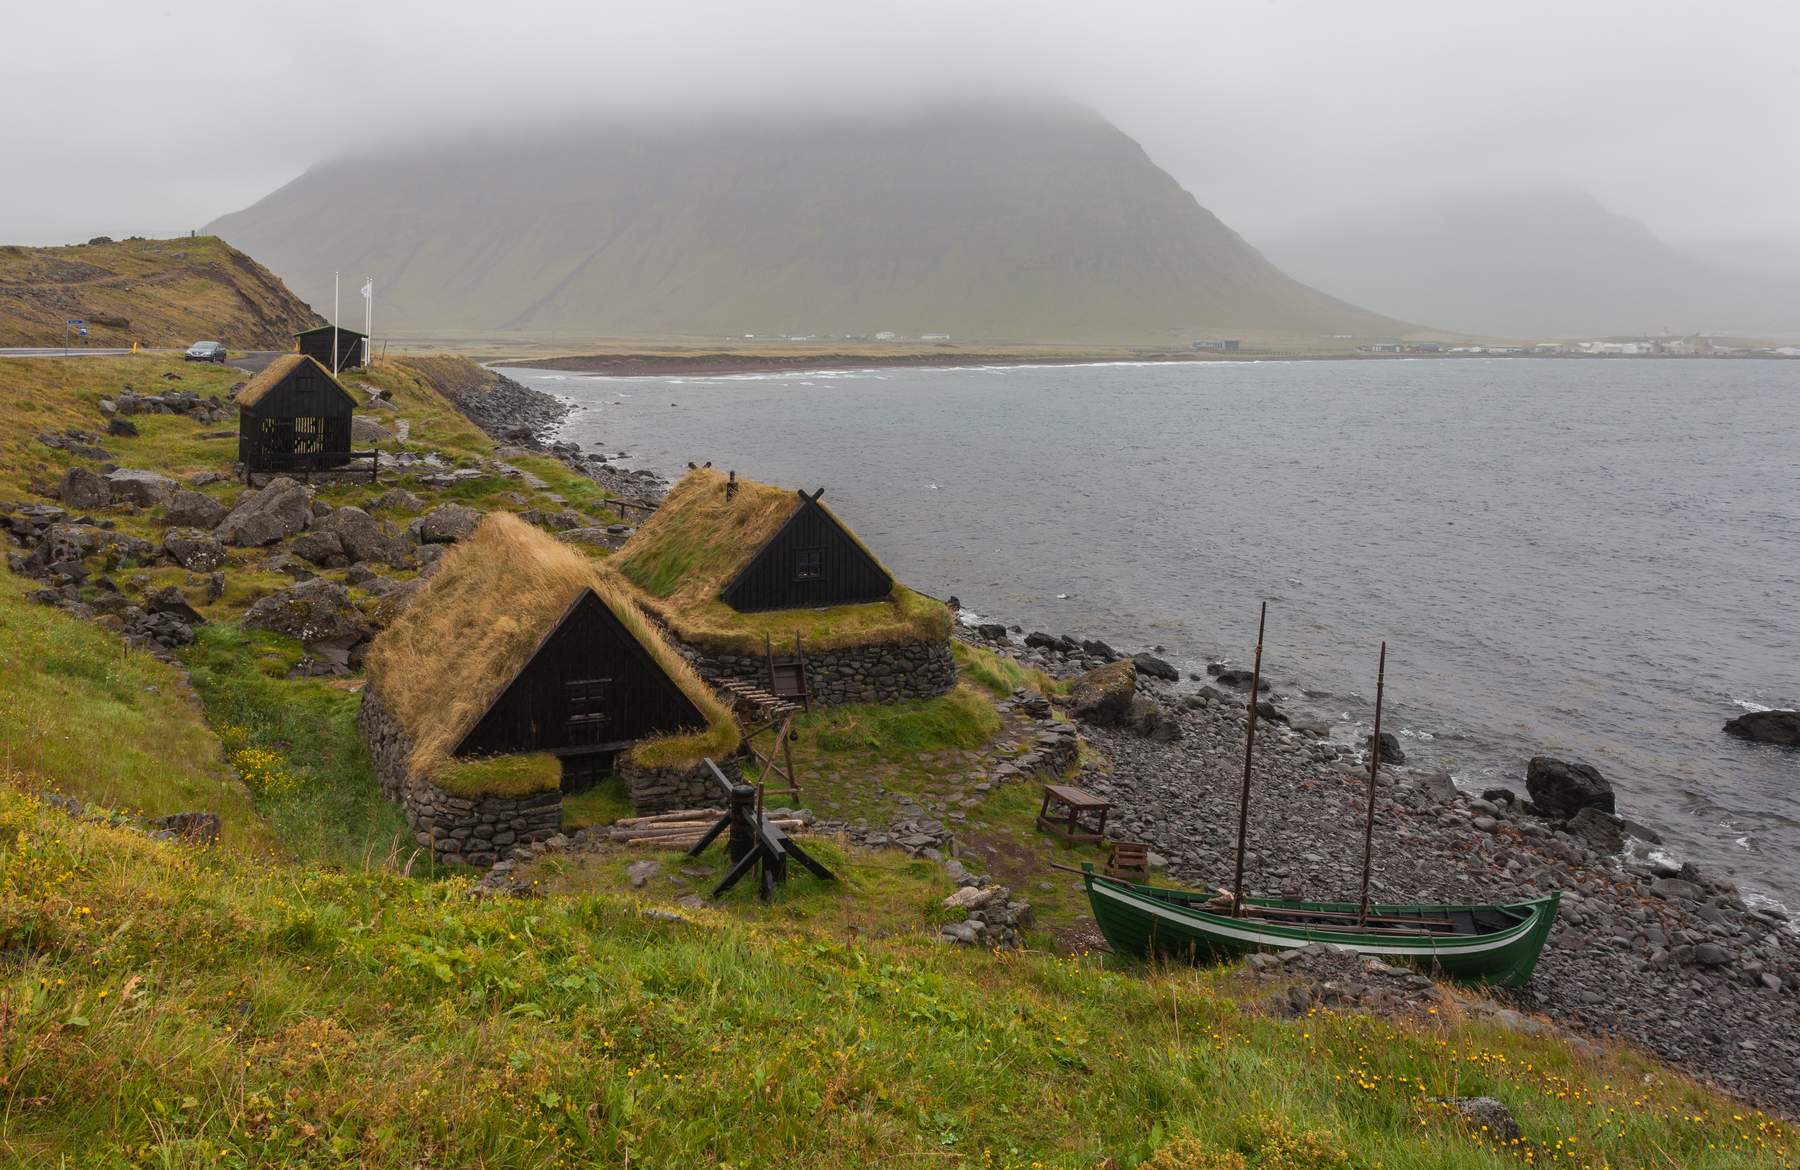 An example of a very small museum: A maritime museum located in the village of Bolungarvík, Vestfirðir, Iceland showing a 19th-century fishing base: typical boat of the period and associated industrial buildings.